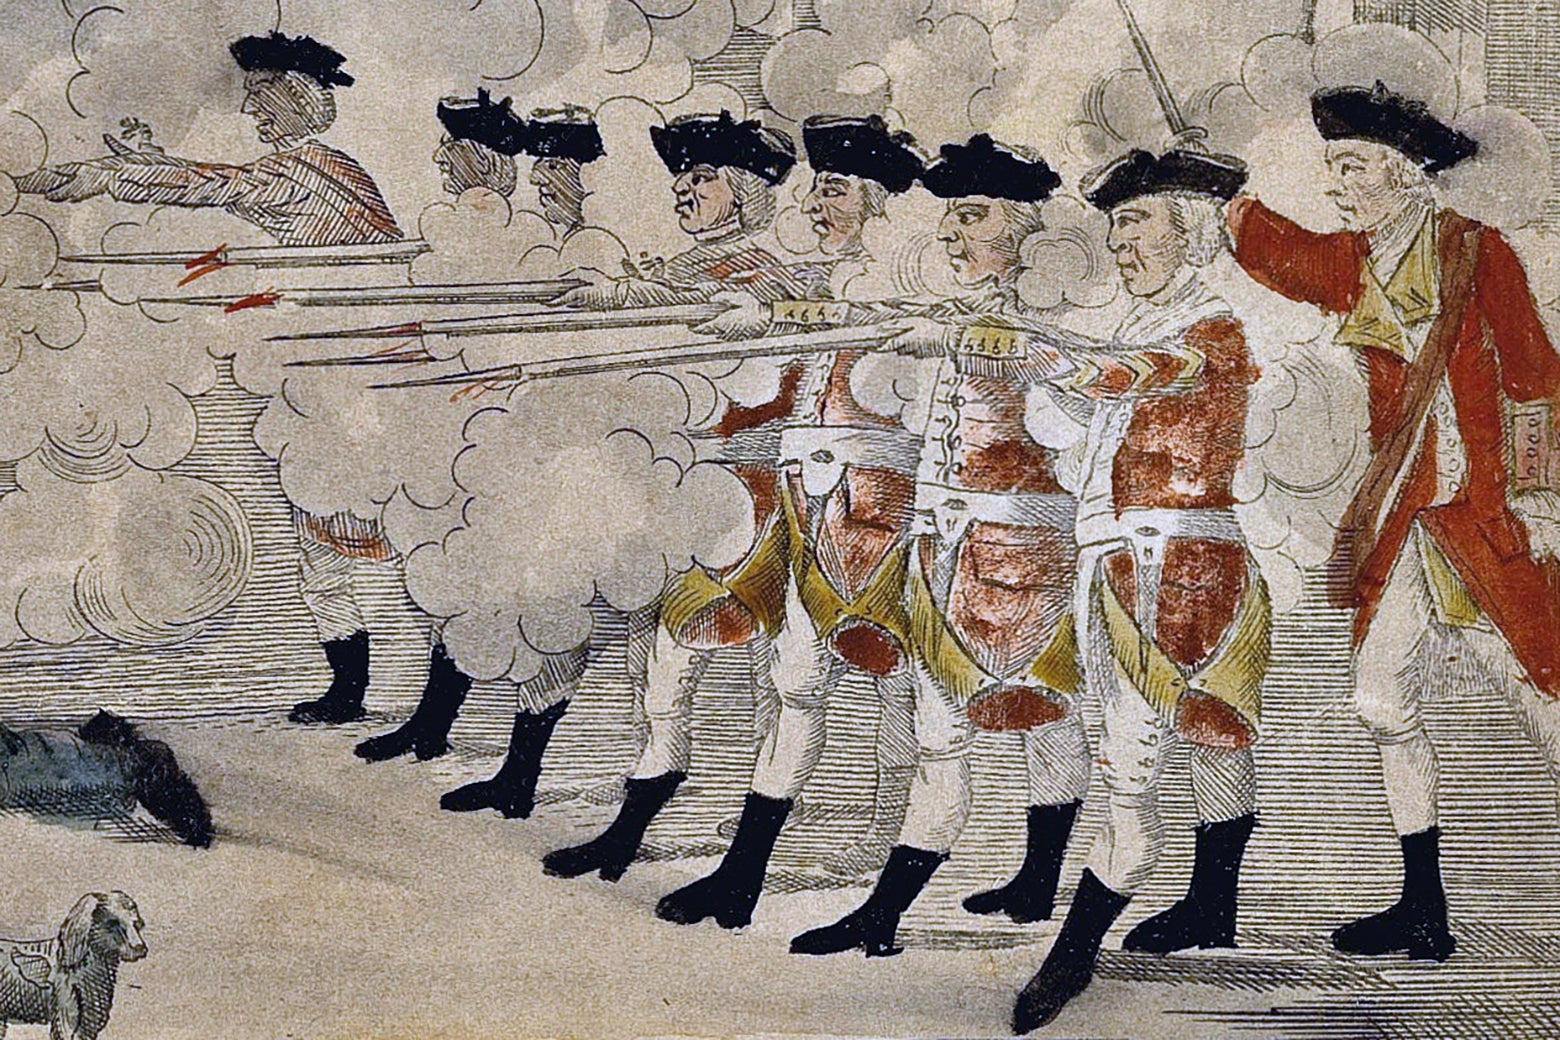 A detail from Paul Revere's engraving of the Boston Massacre showing a line of British soldiers firing their muskets into a crowd.